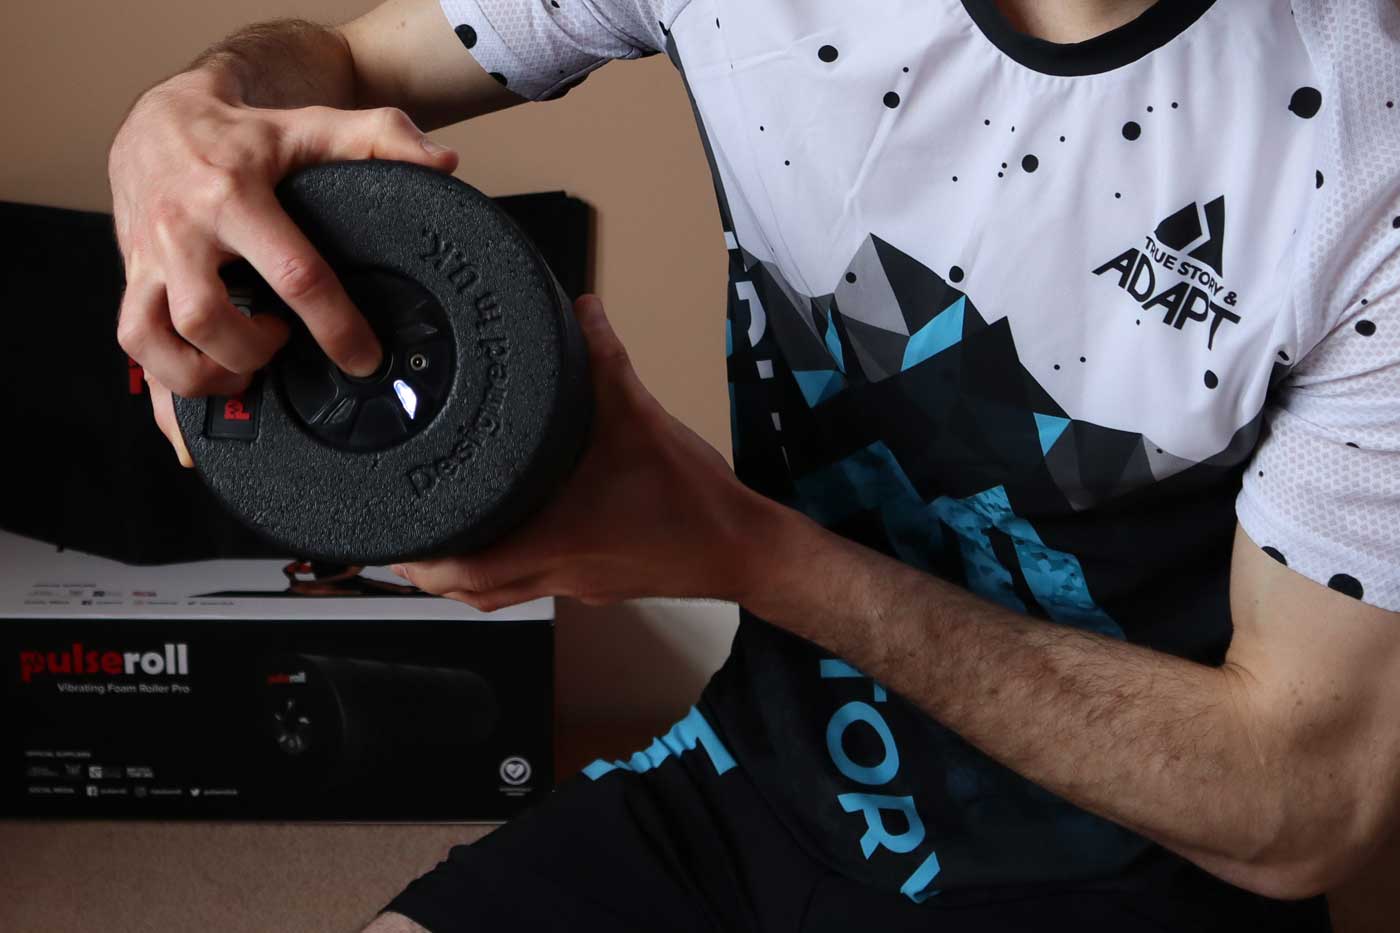 Oporating the Pulseroll Vibrating Foam Roller Pro using the power button